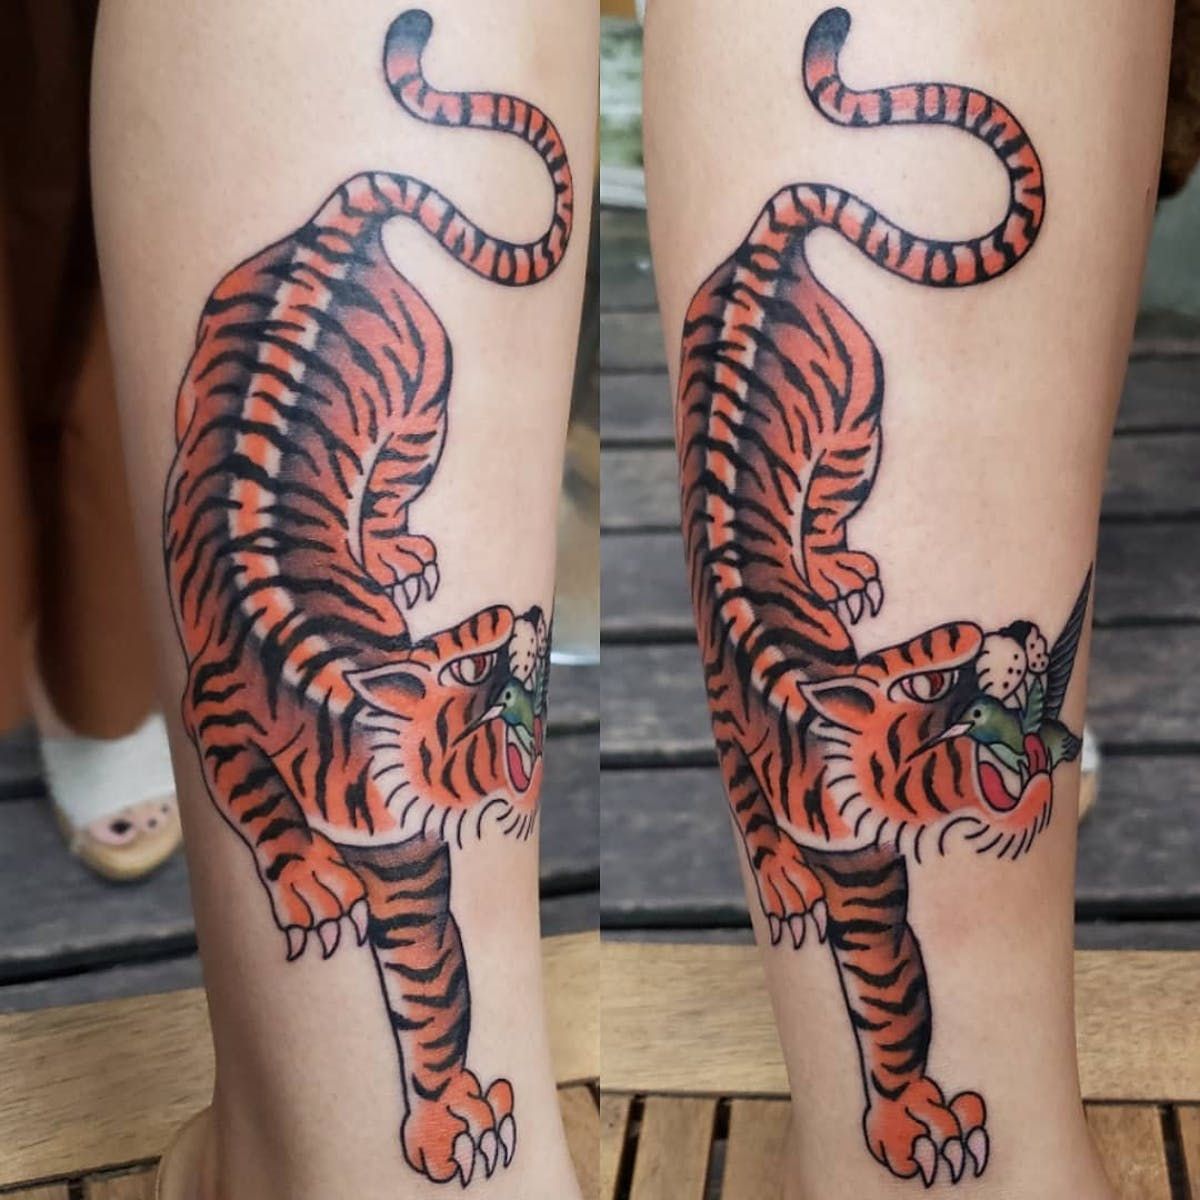 Details more than 63 crawling tiger tattoo - in.cdgdbentre